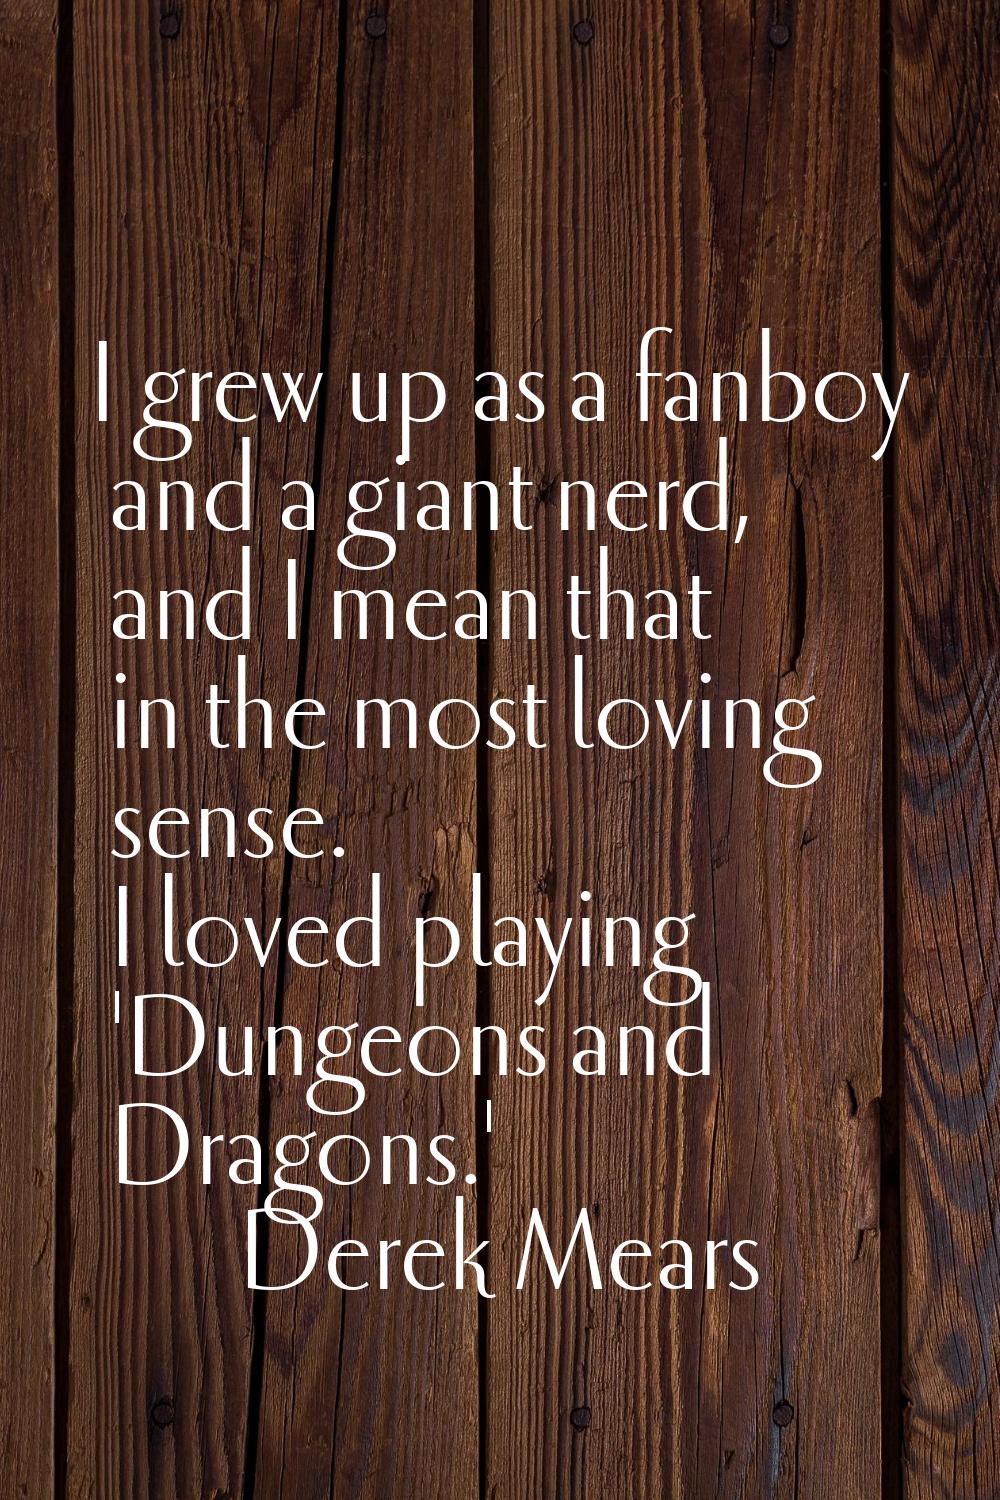 I grew up as a fanboy and a giant nerd, and I mean that in the most loving sense. I loved playing '